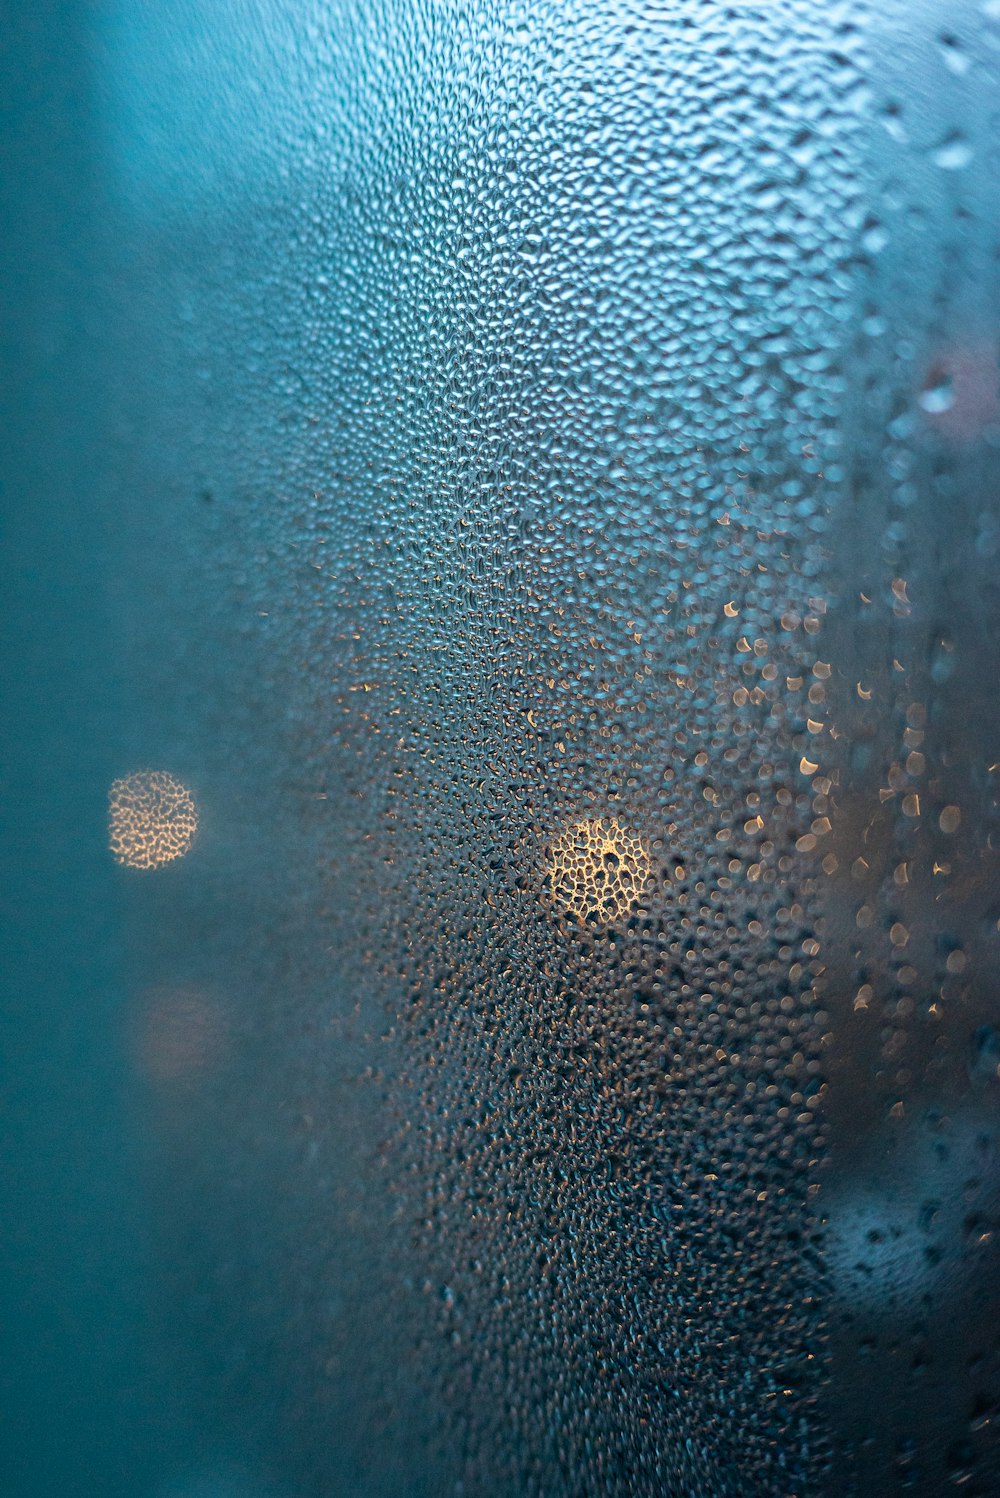 a close up of a window with rain drops